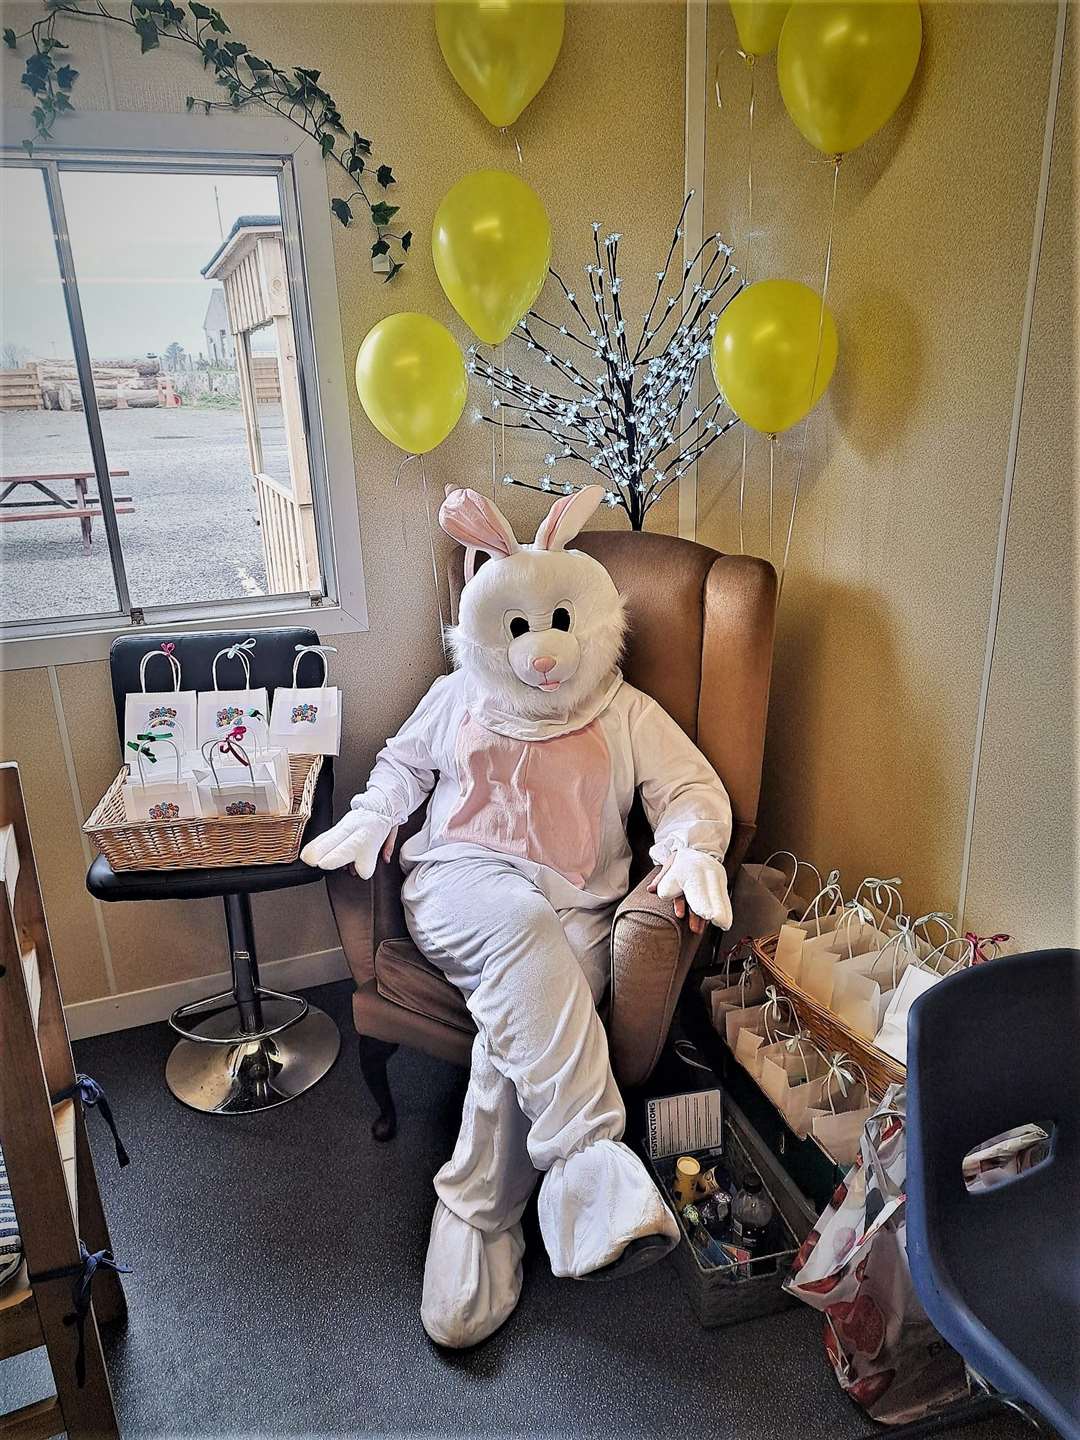 Lorna Mackenzie dressed up as the Easter Bunny for the Saturday event.